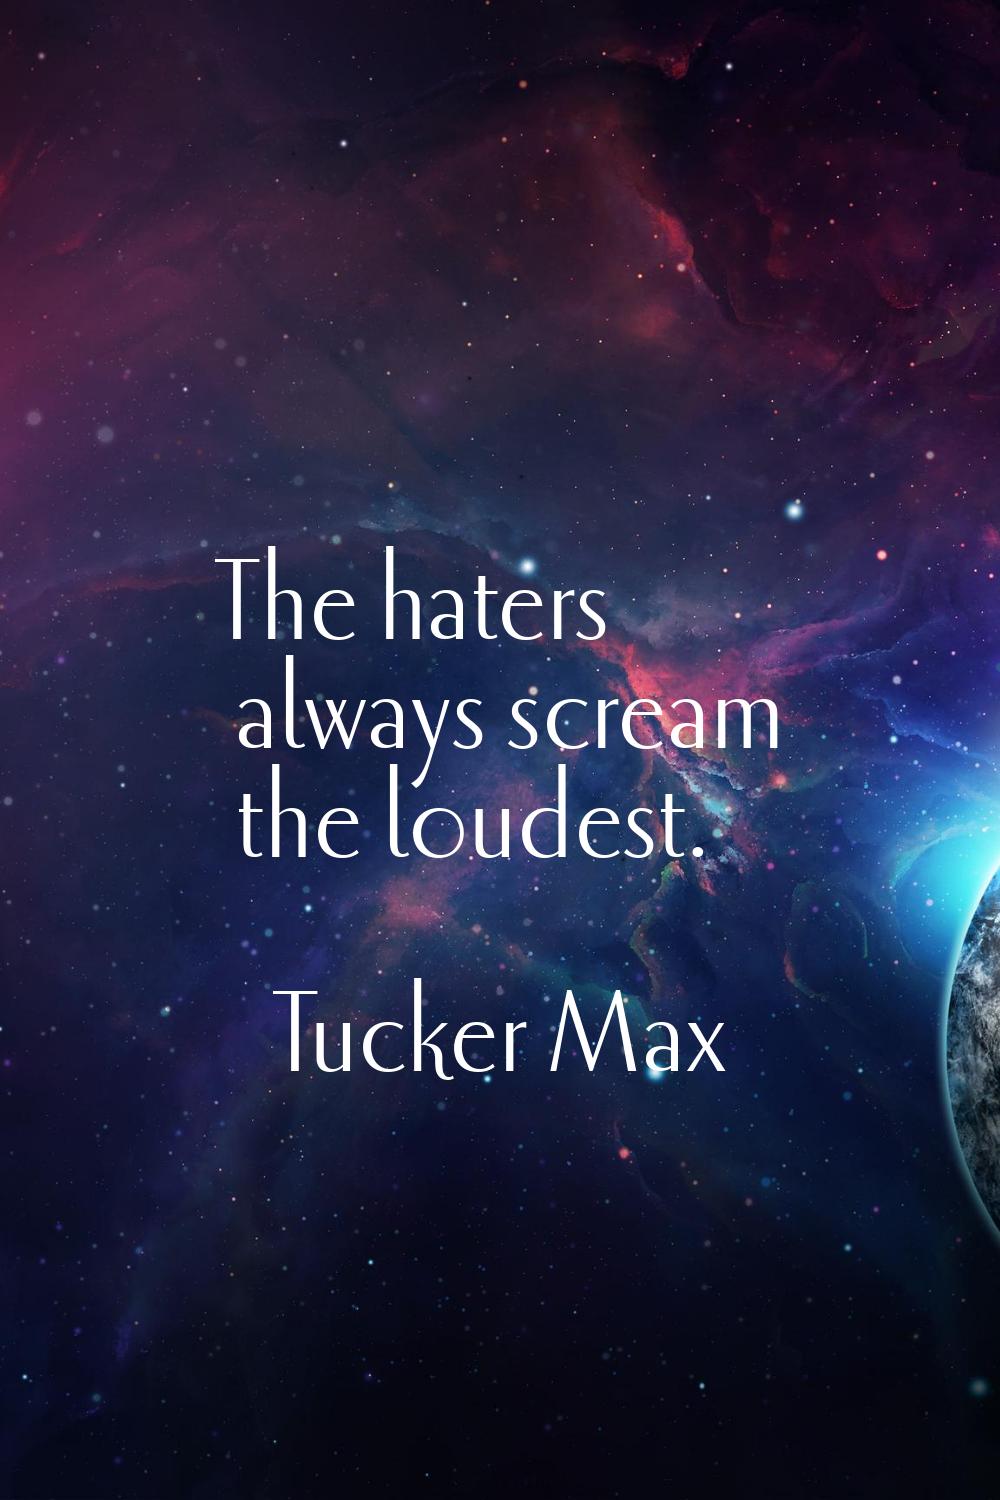 The haters always scream the loudest.